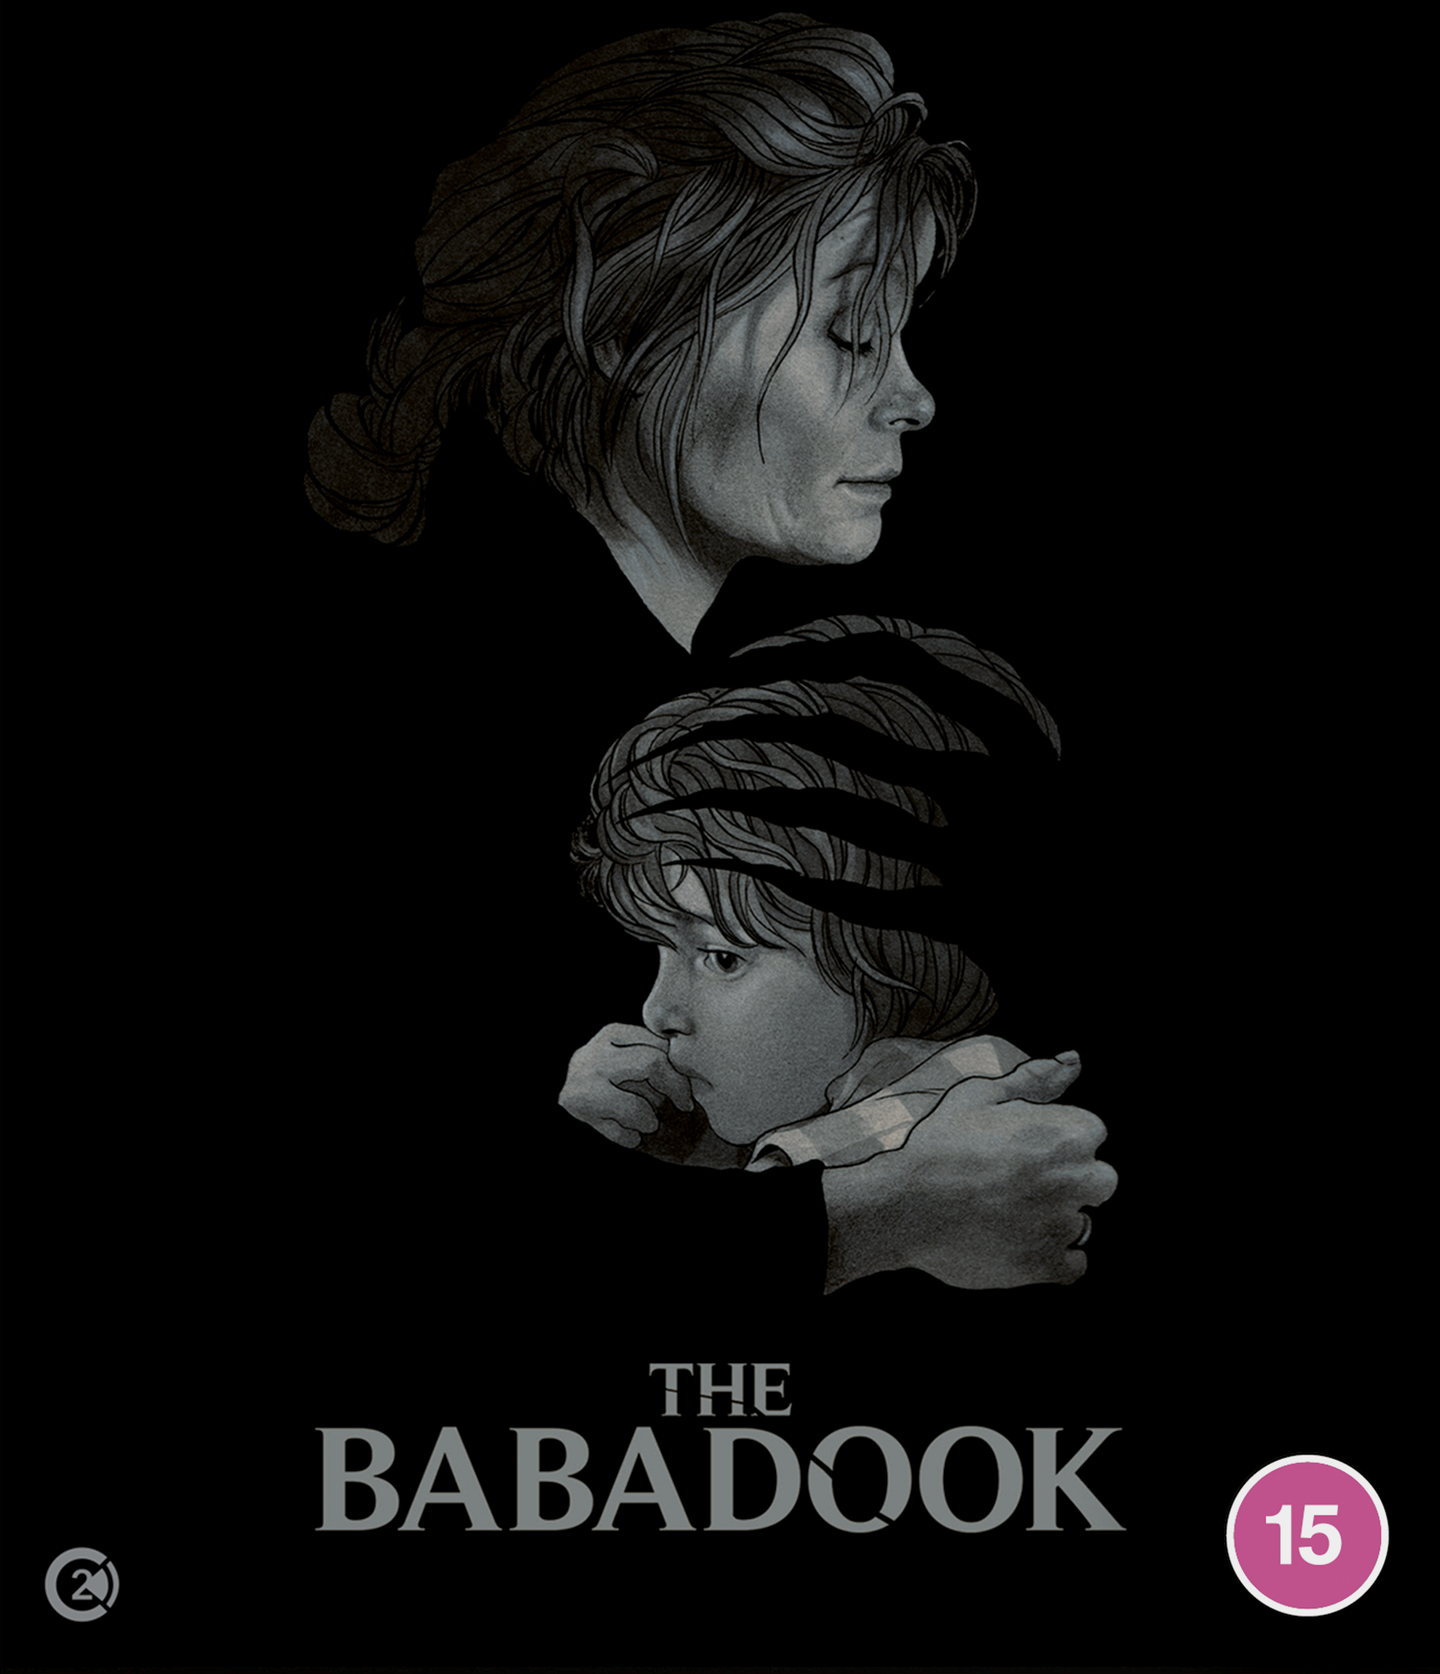 THE BABADOOK (REGION FREE IMPORT) 4K UHD